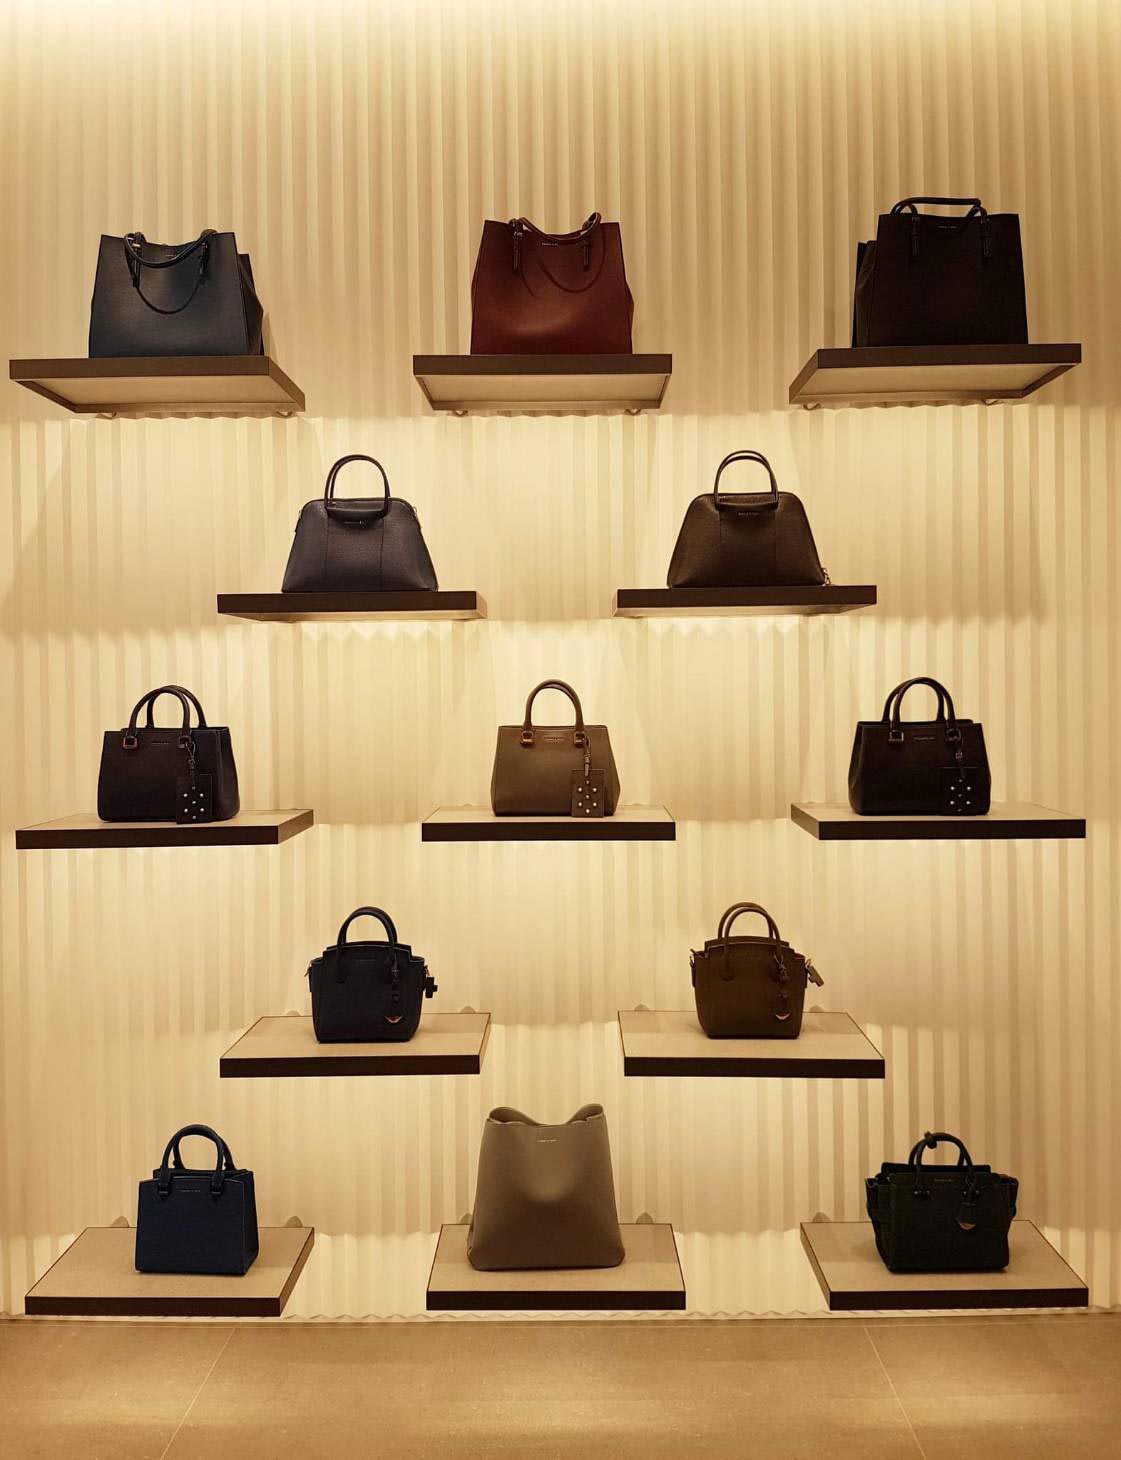 Charles & Keith in Velacheri,Chennai - Best Bag Accessory Dealers in  Chennai - Justdial